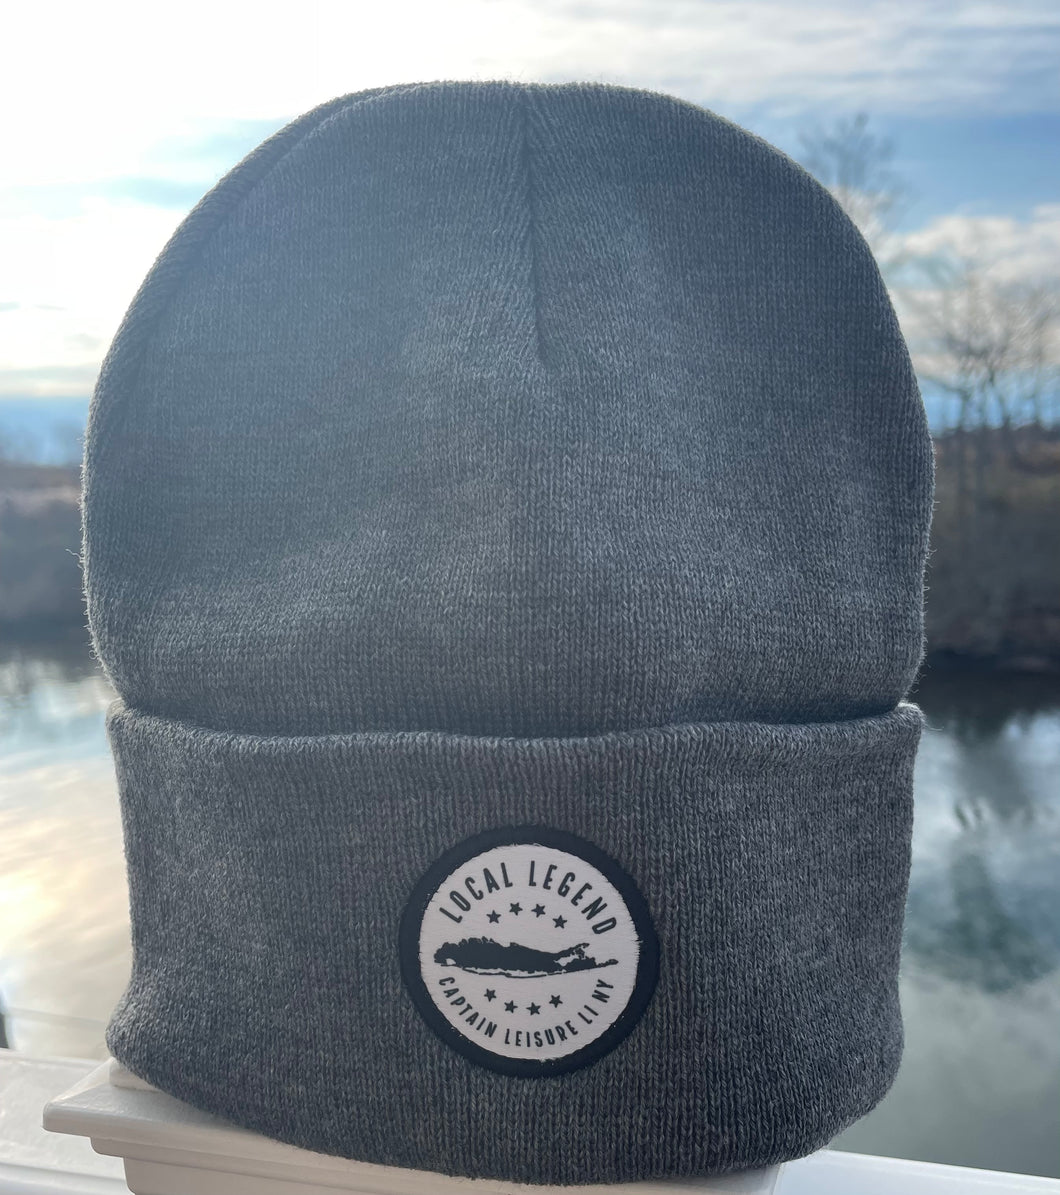 Local Legend Knit Hat - Gray